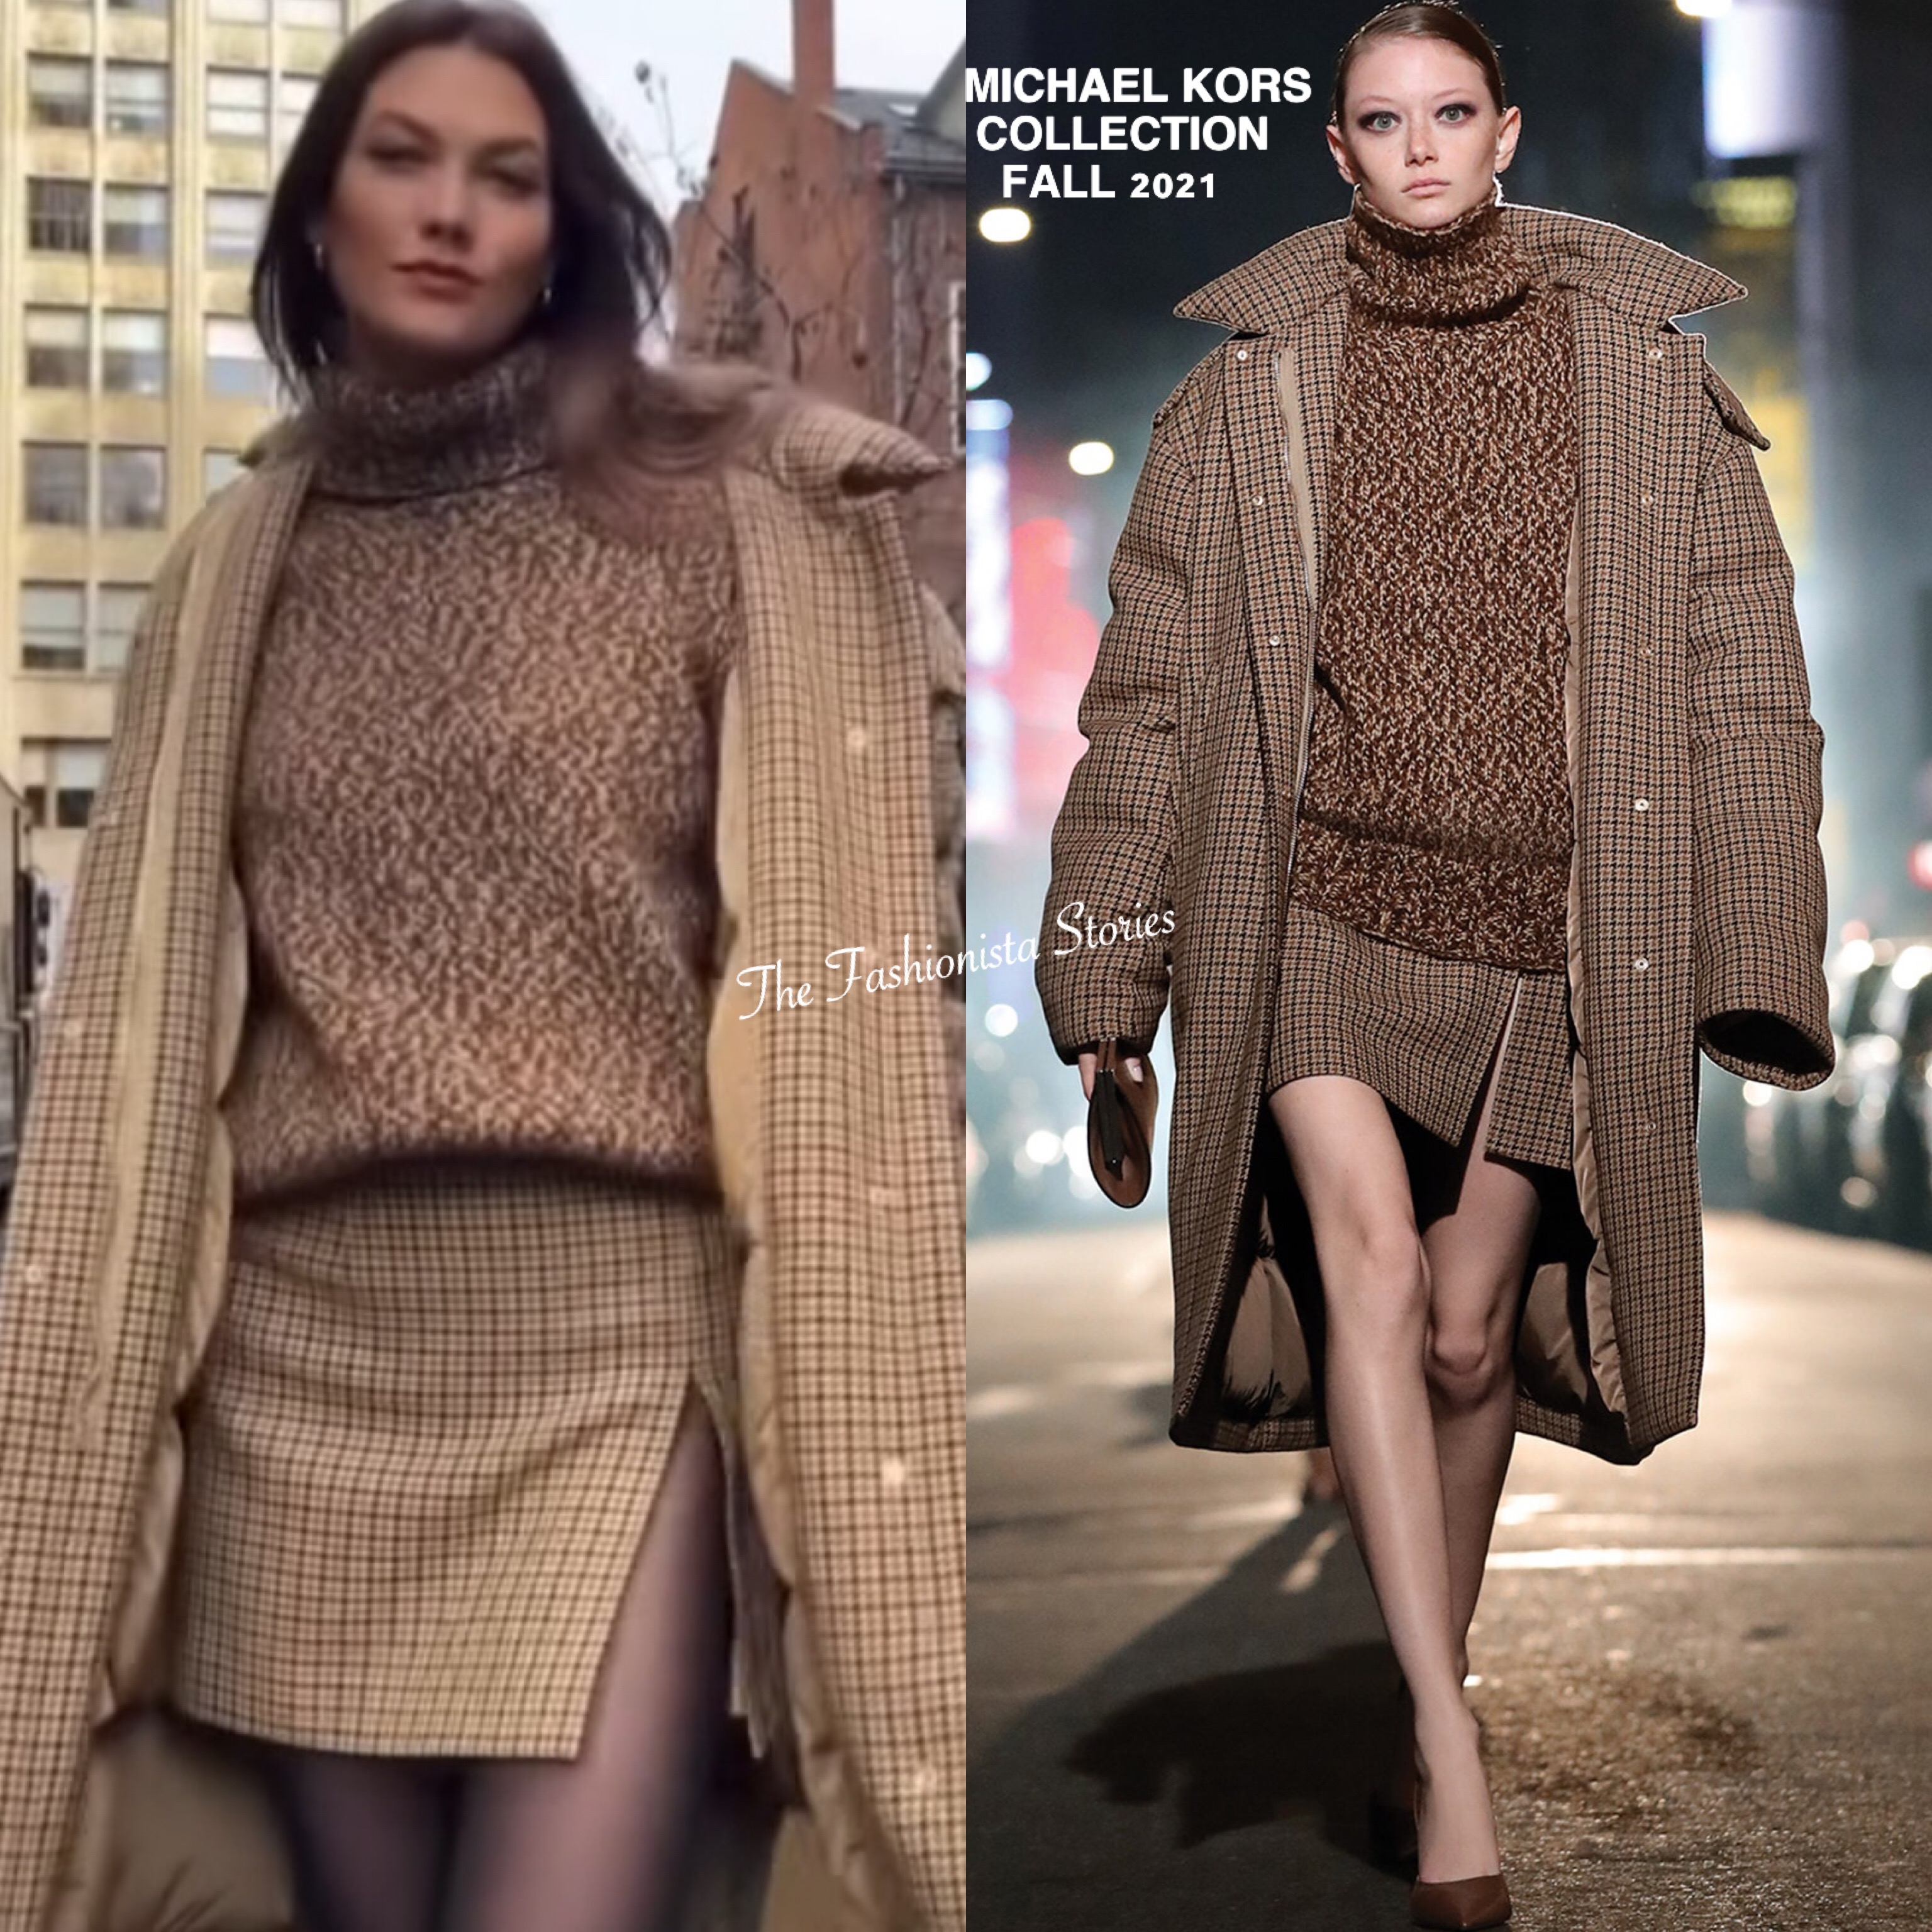 Instagram Style: Karlie Kloss in Michael Kors Collection